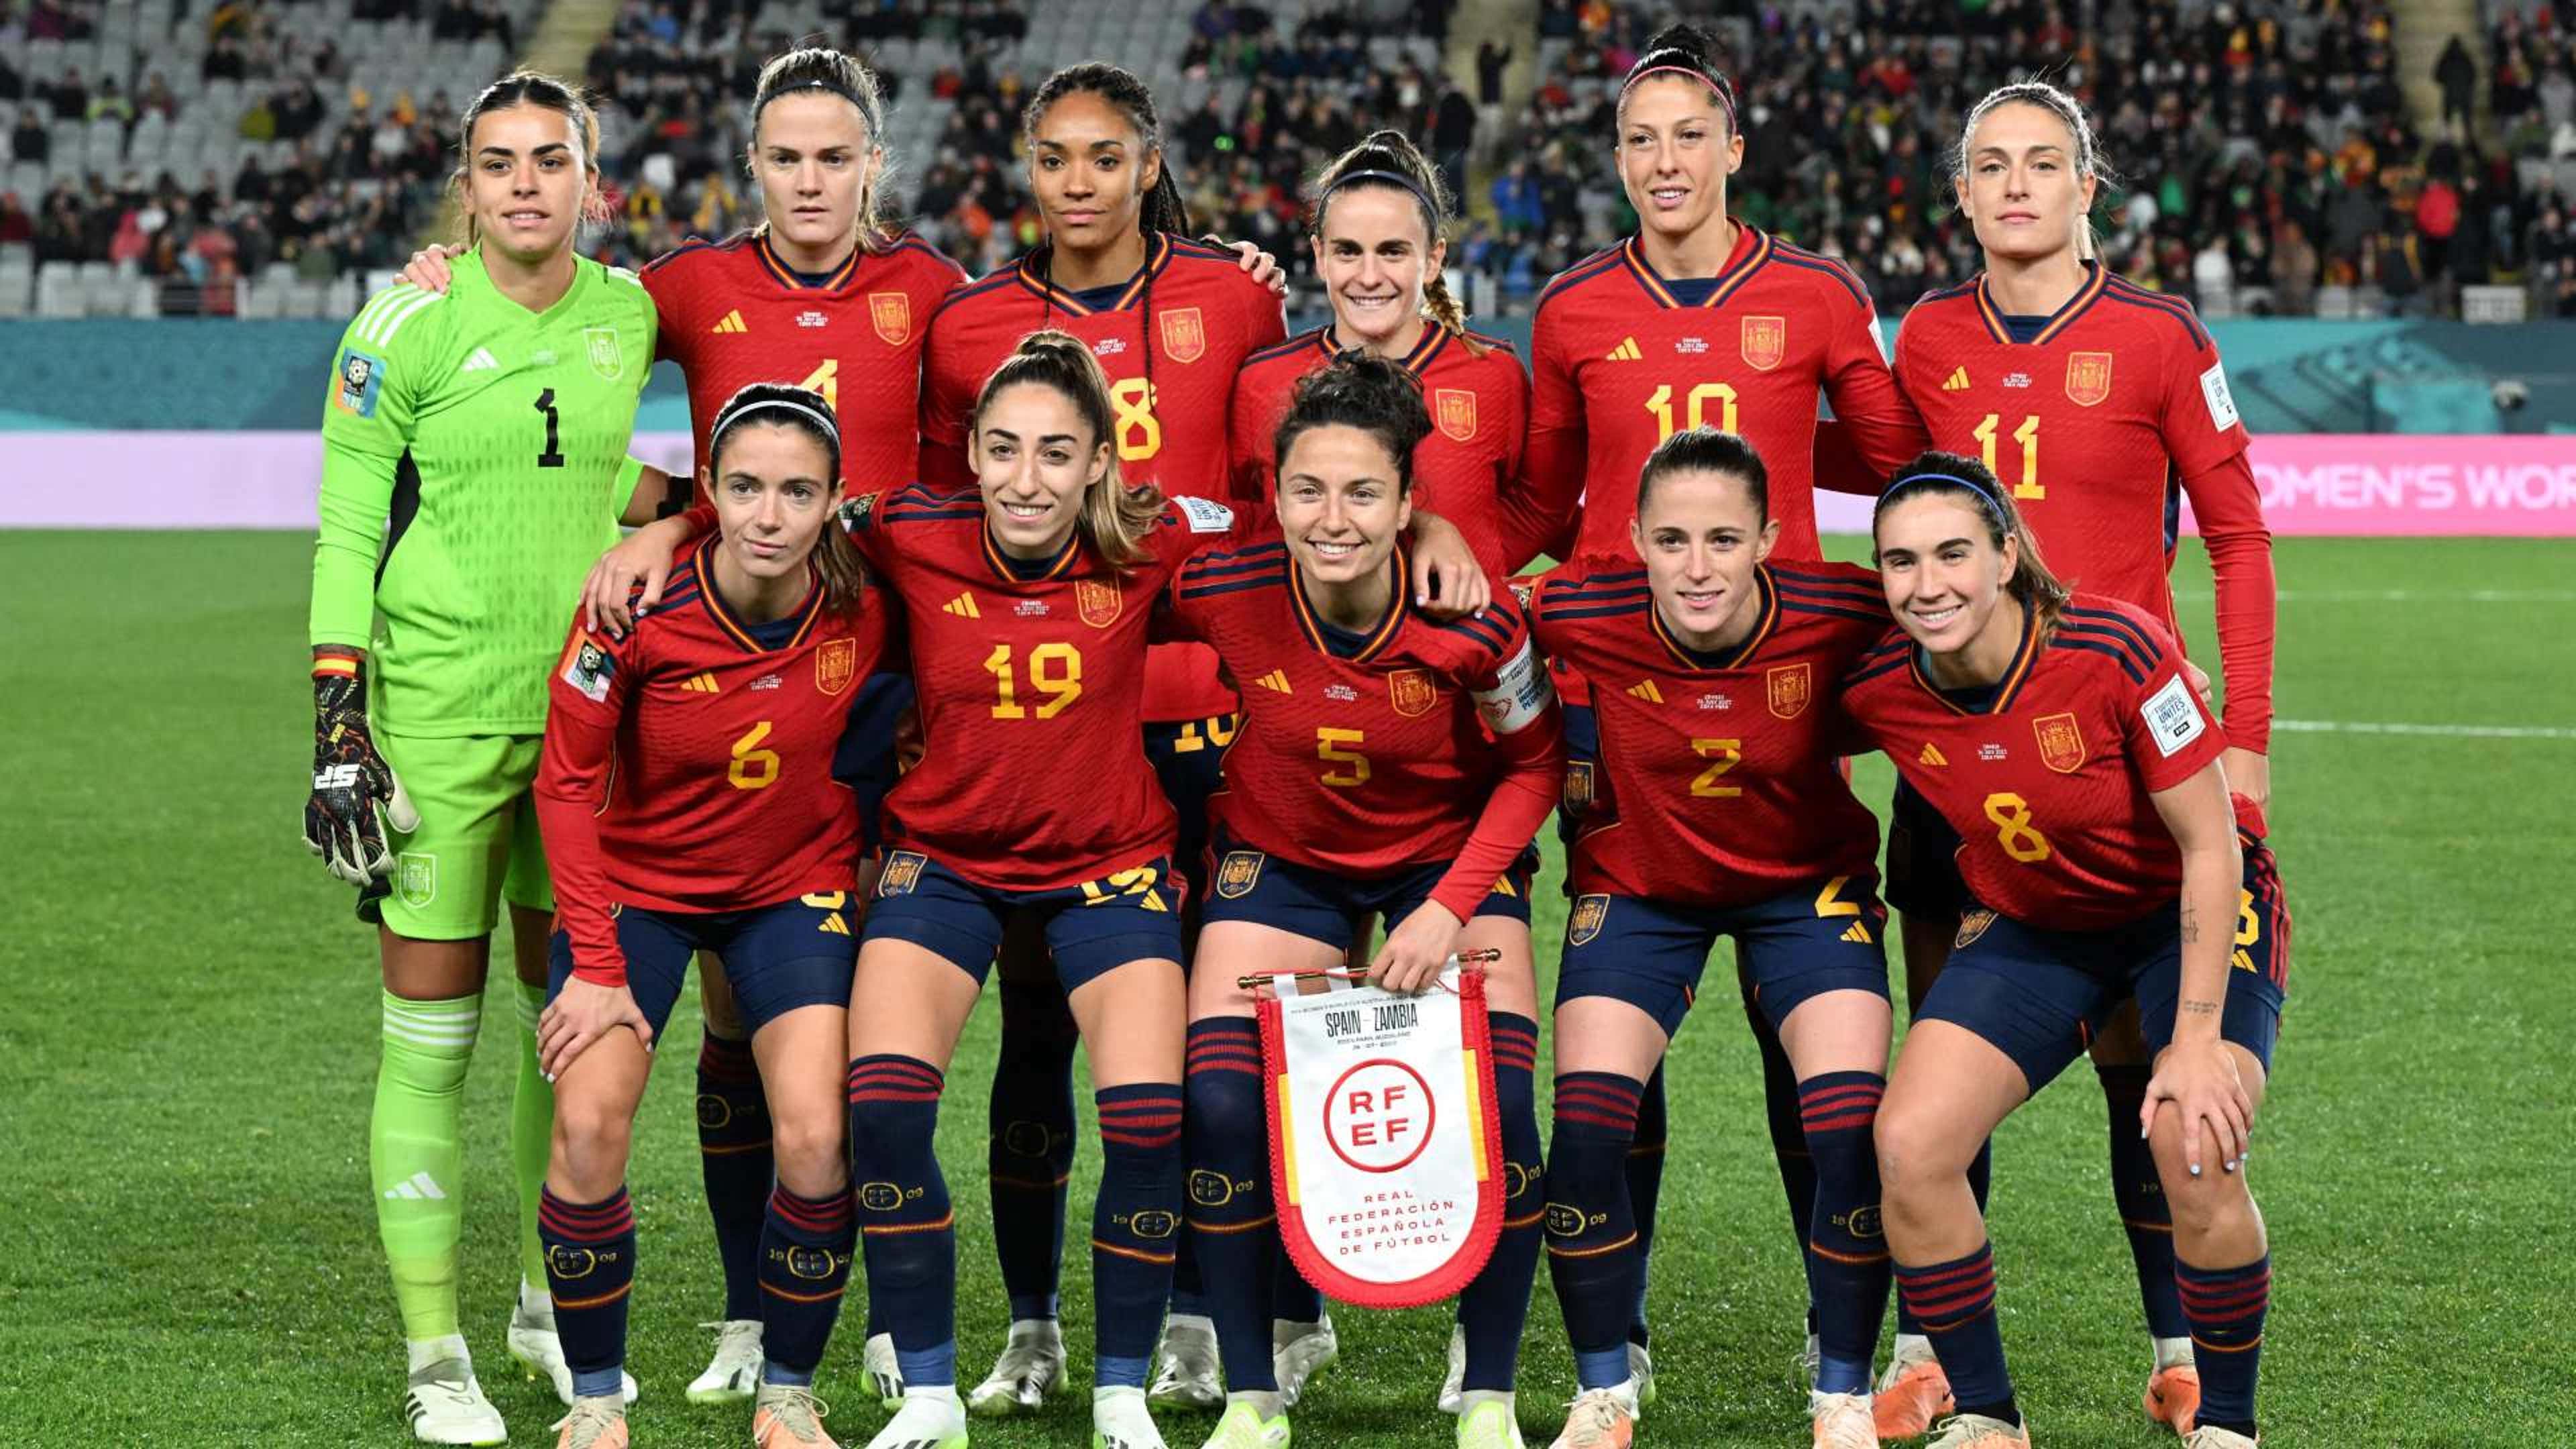 Spain reportedly leave Women's World Cup base camp in Palmerston North